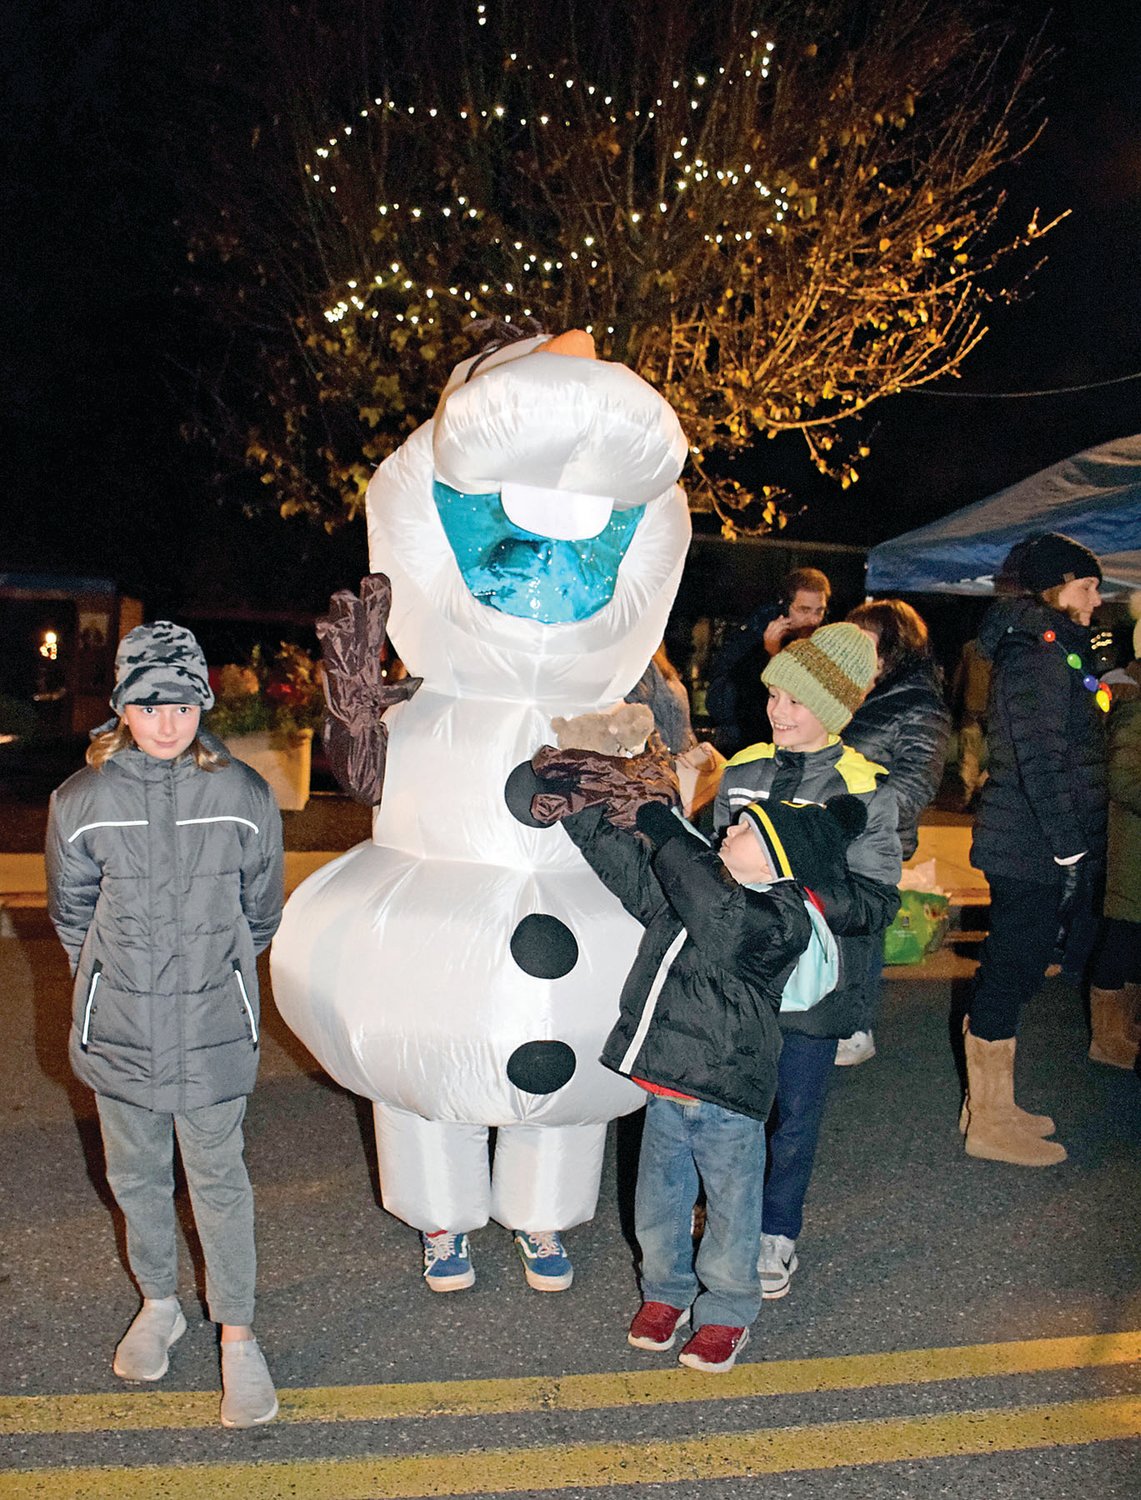 Andrew, Angel and Donald Schofield of Perkasie with Olaf of “Frozen.”